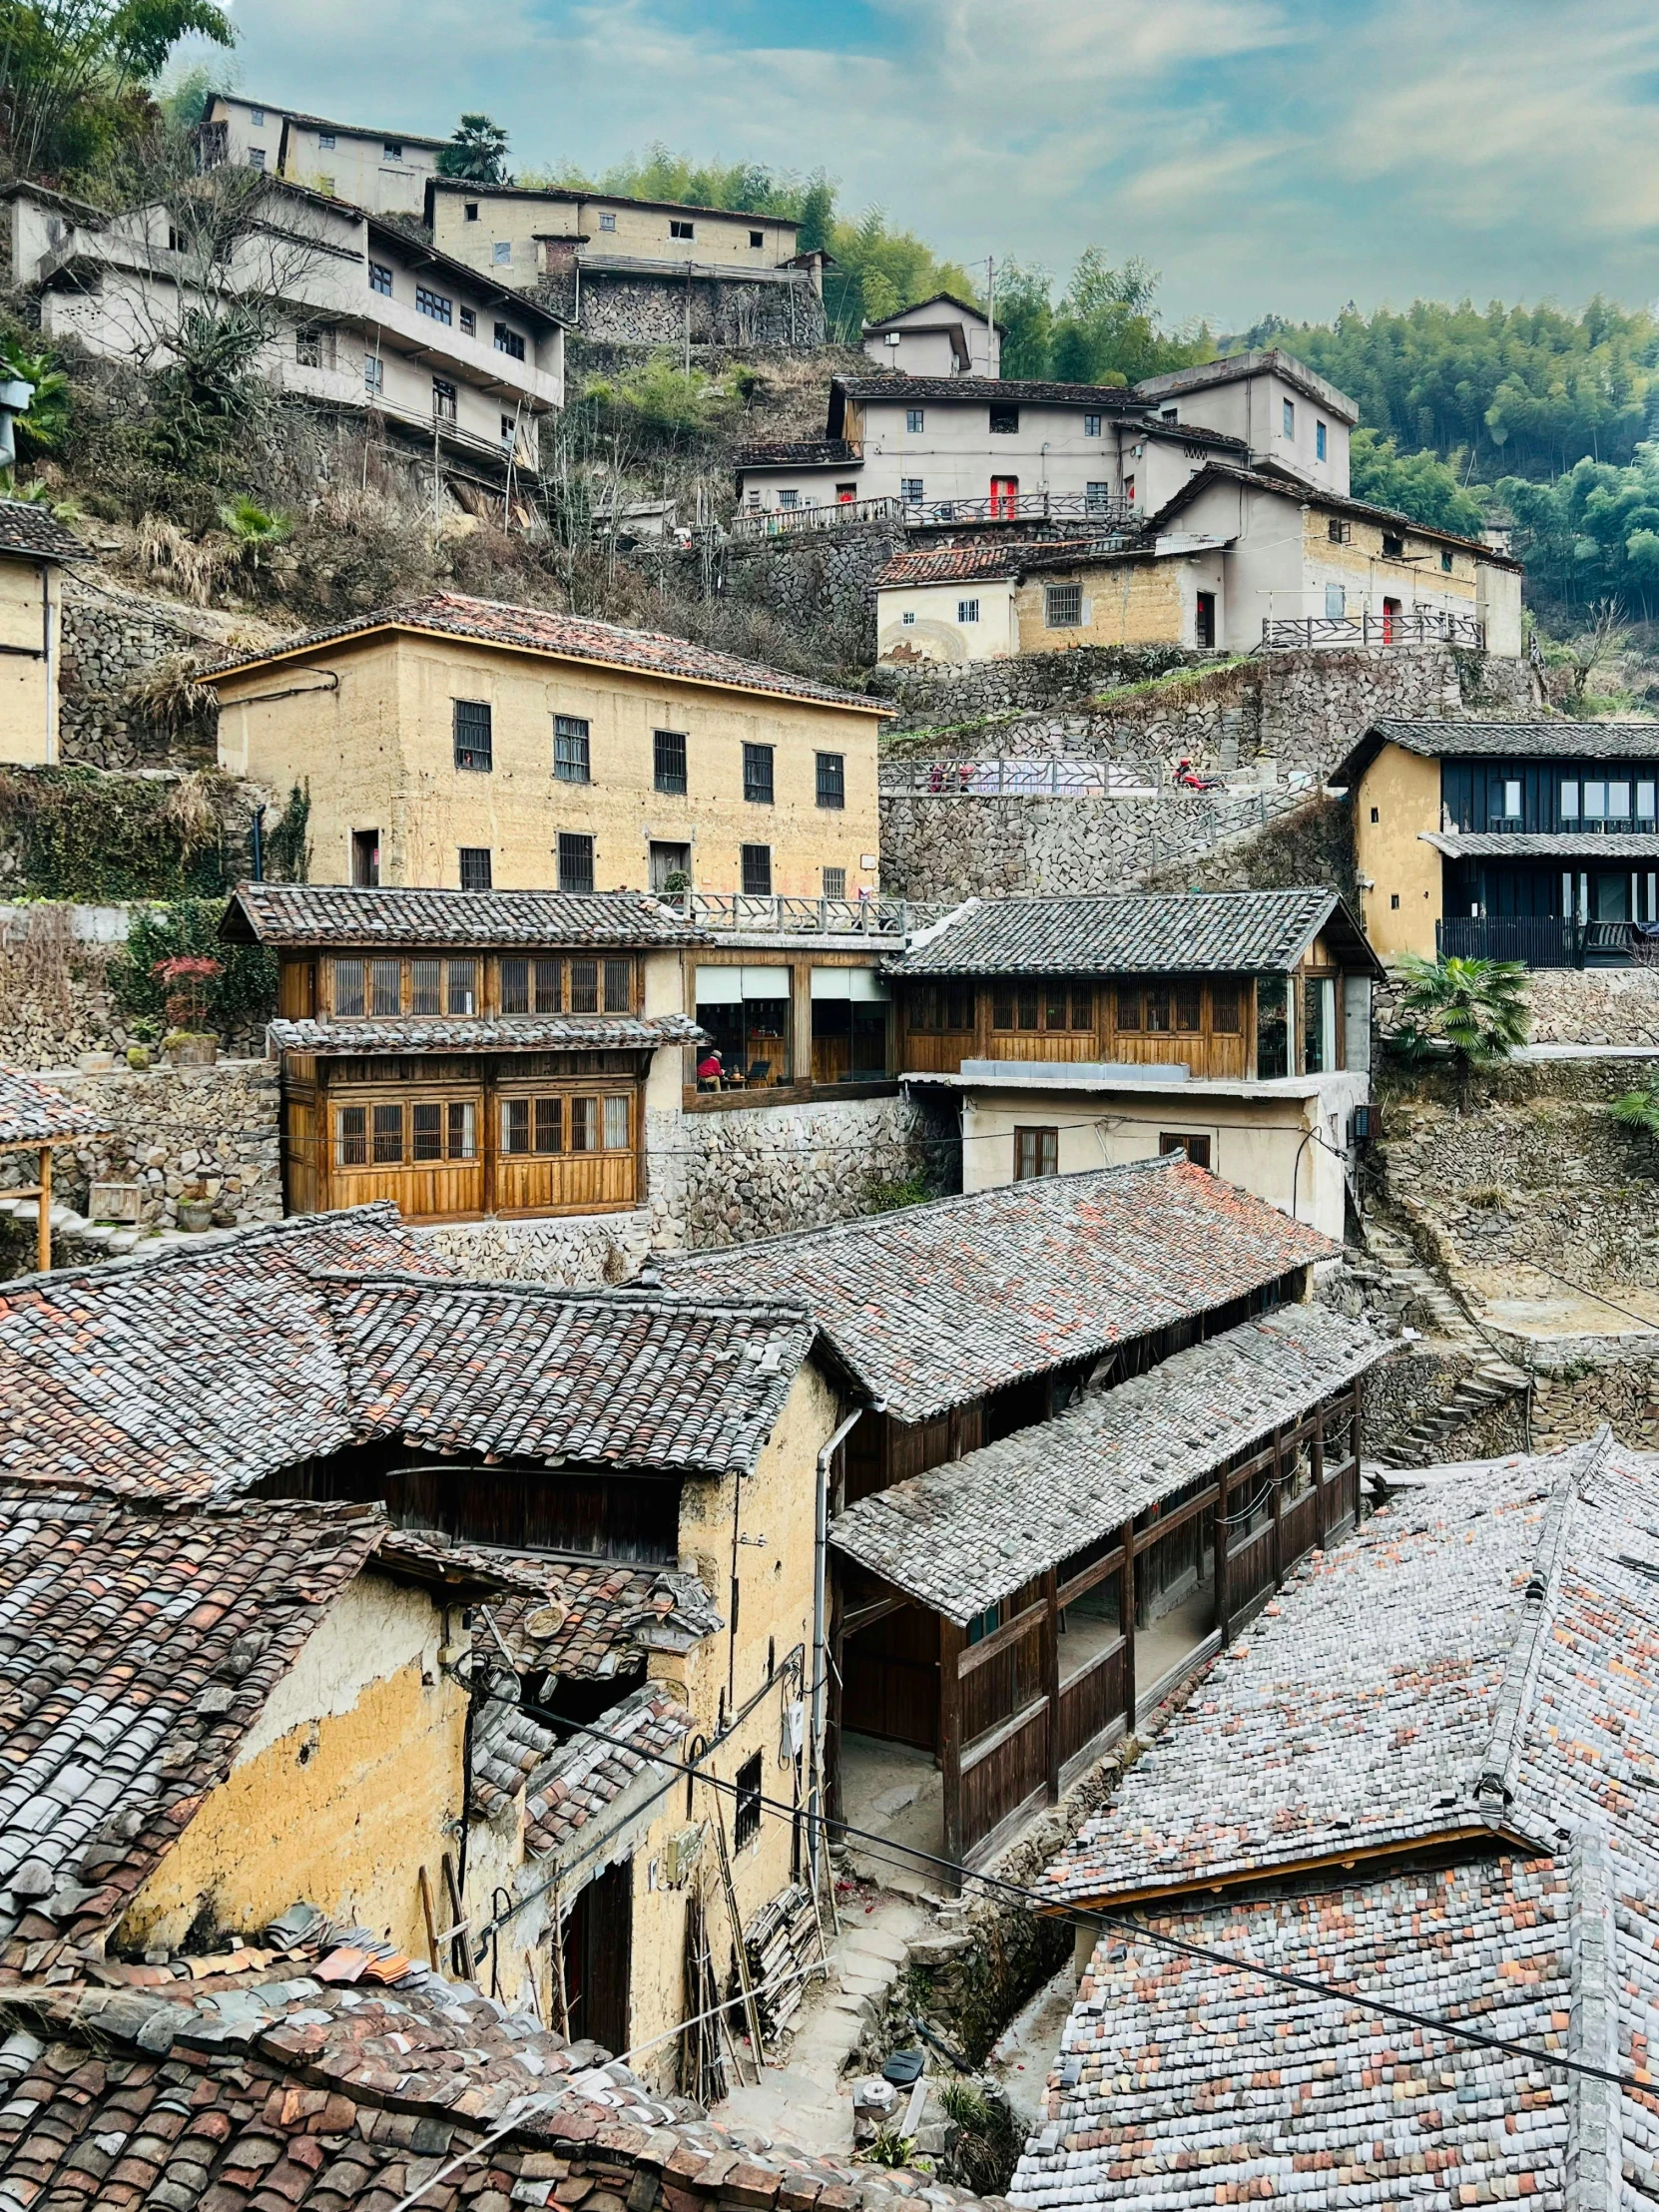 many old buildings are seen with a mountain behind them